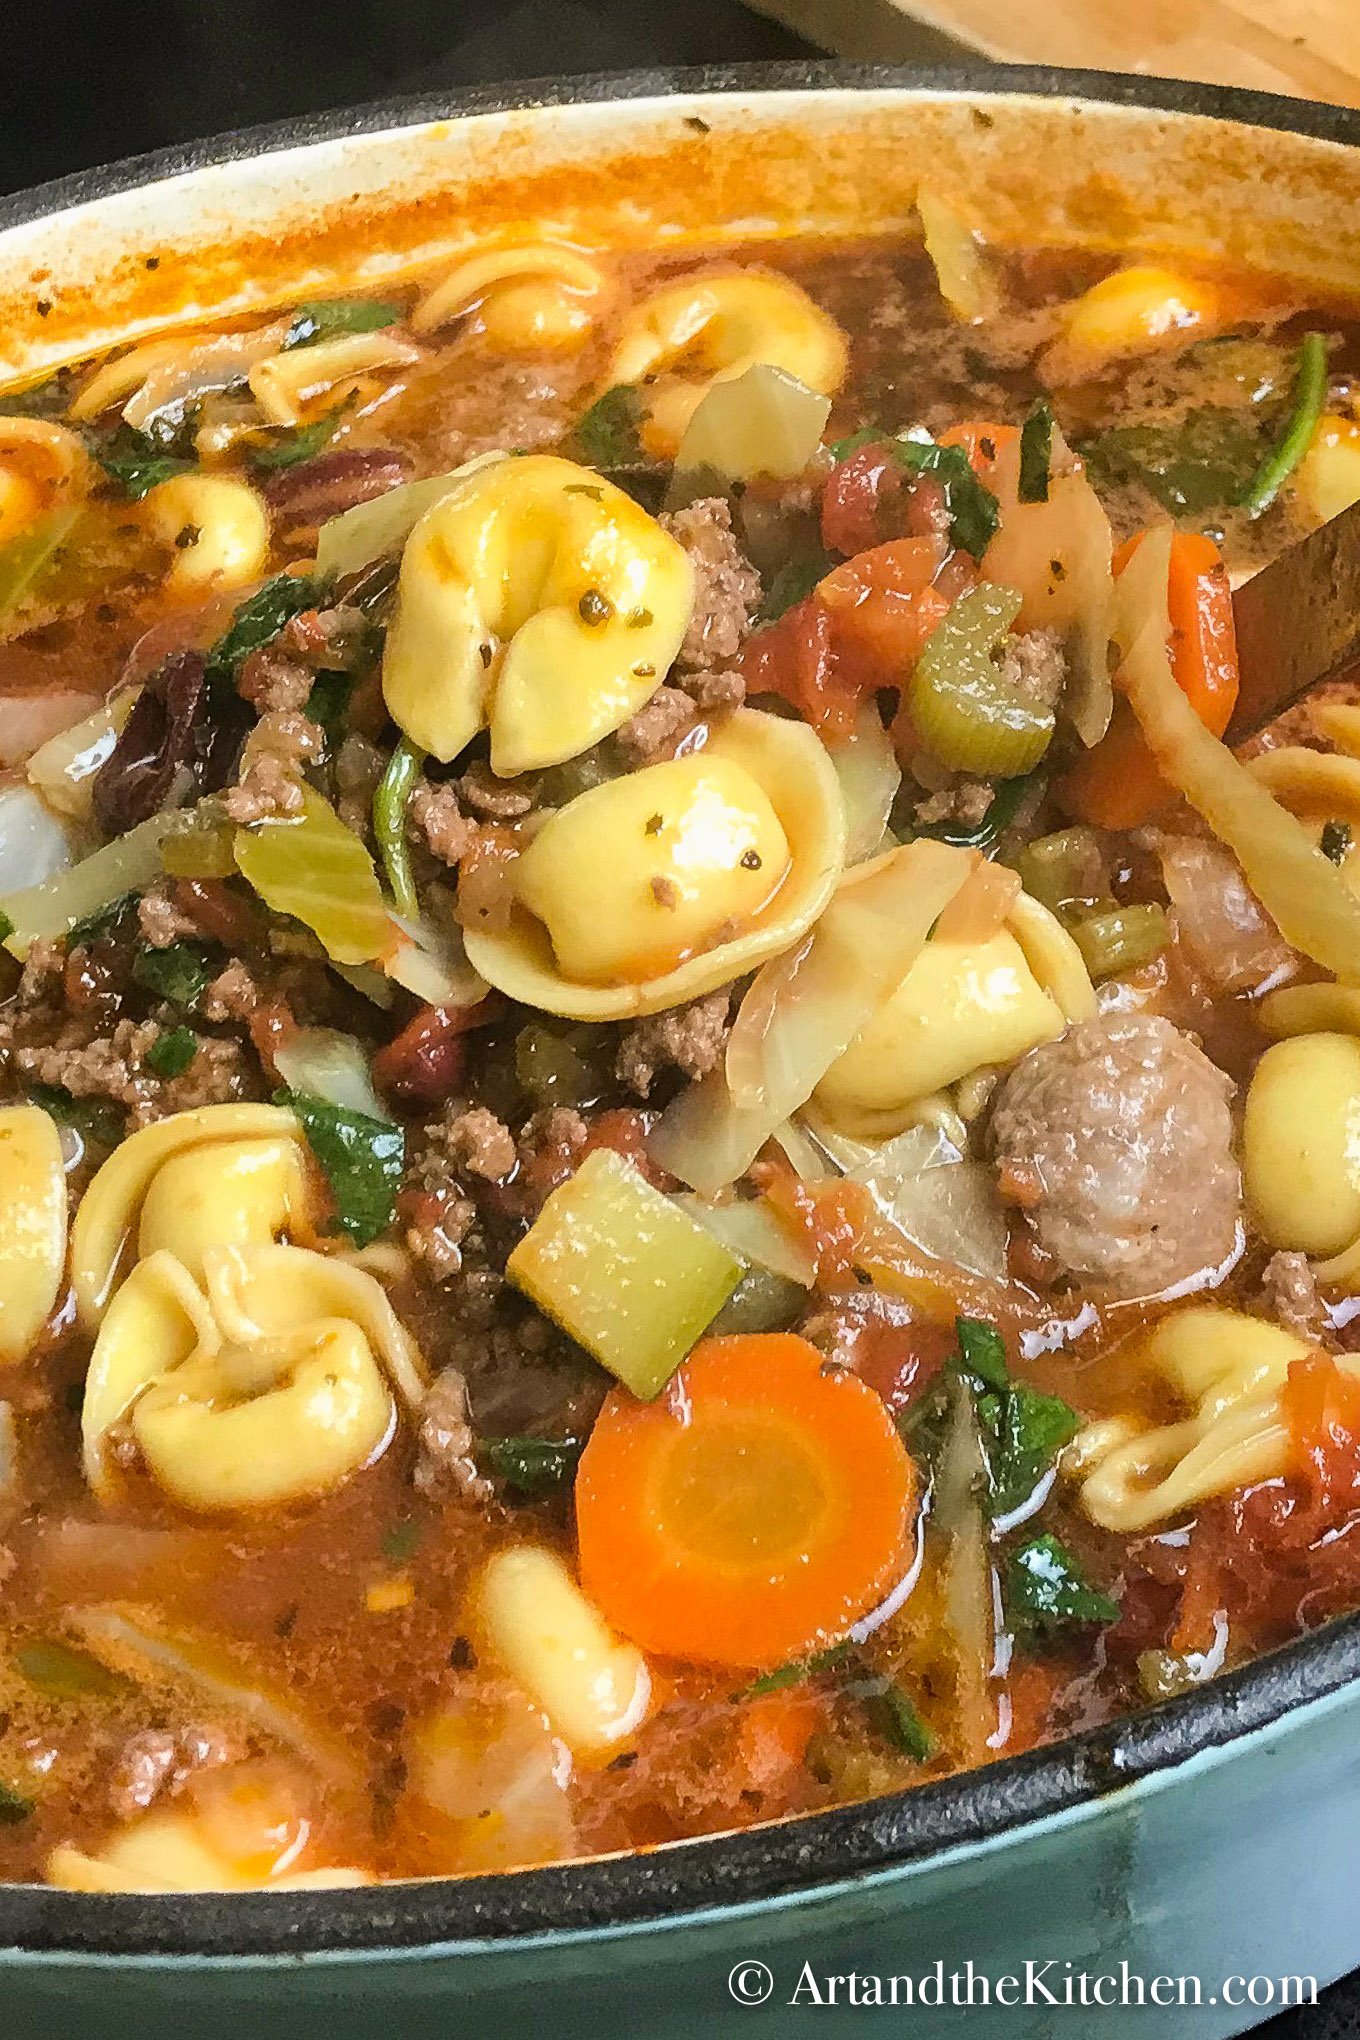 Dutch oven filled with soup of tortellini, vegetables, sausage and ground beef.